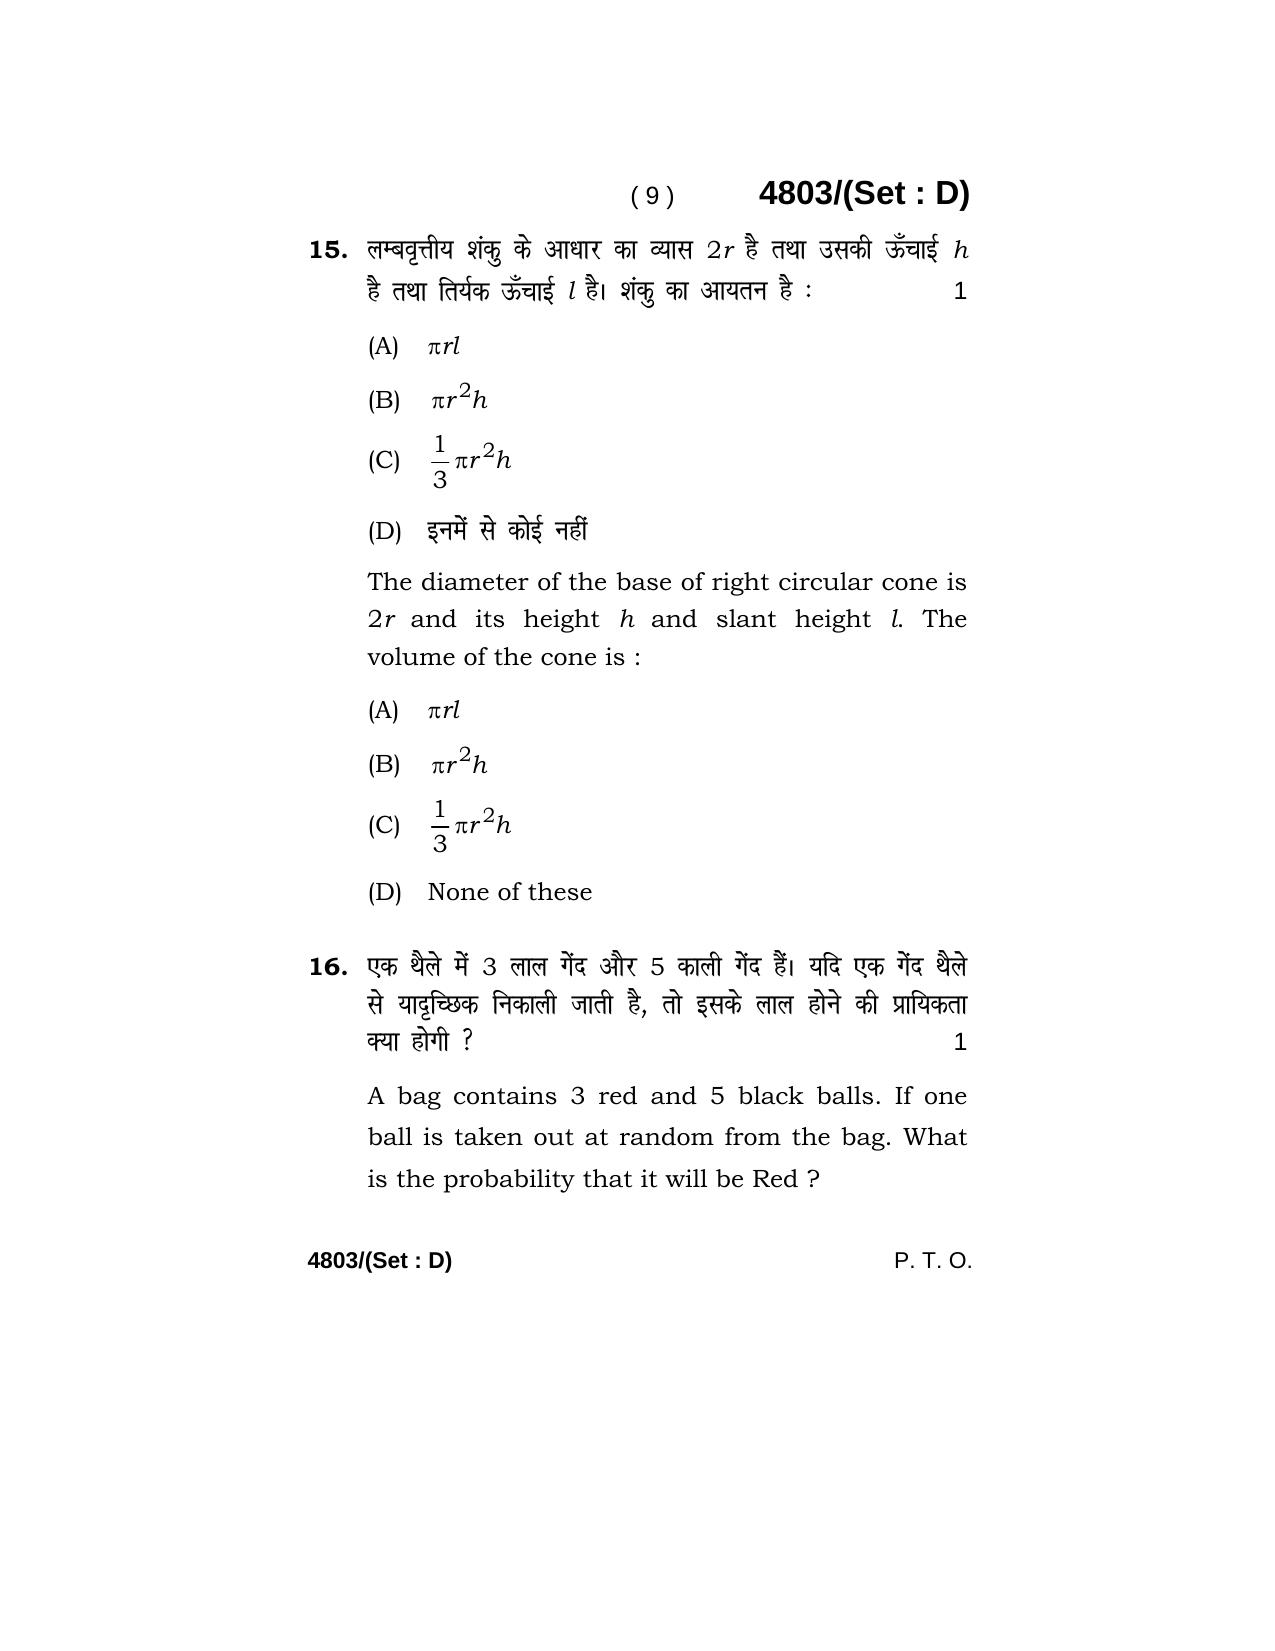 Haryana Board HBSE Class 10 Mathematics 2020 Question Paper - Page 57